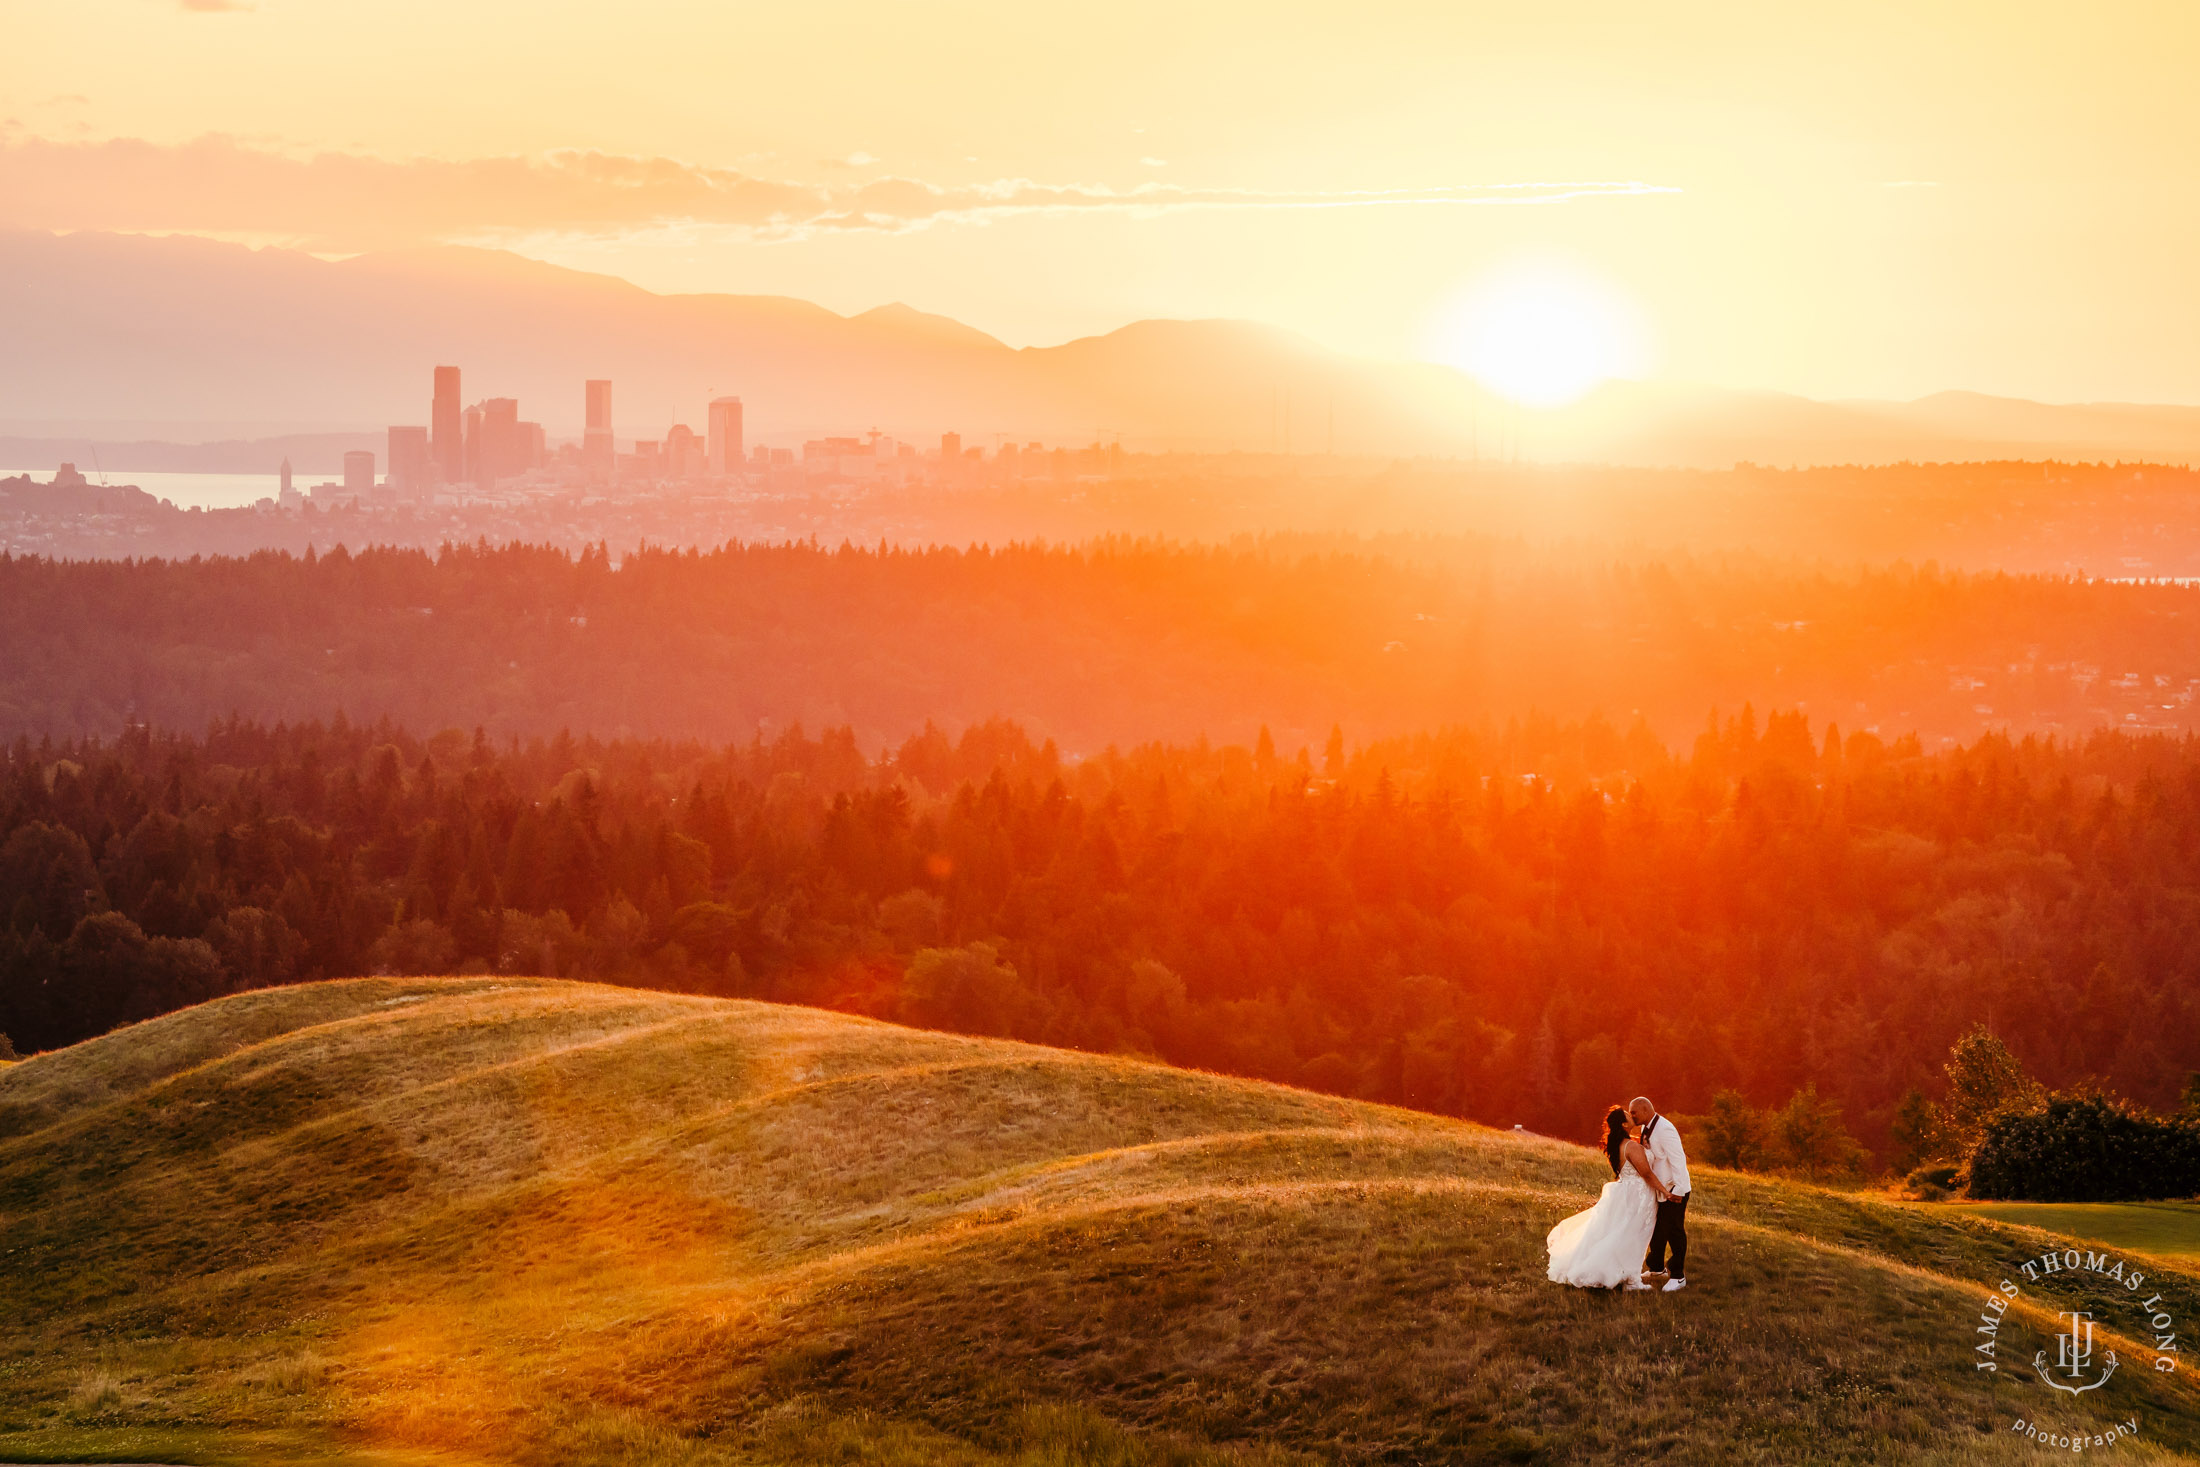 The Club at Newcastle wedding by Seattle wedding photographer James Thomas Long Photography